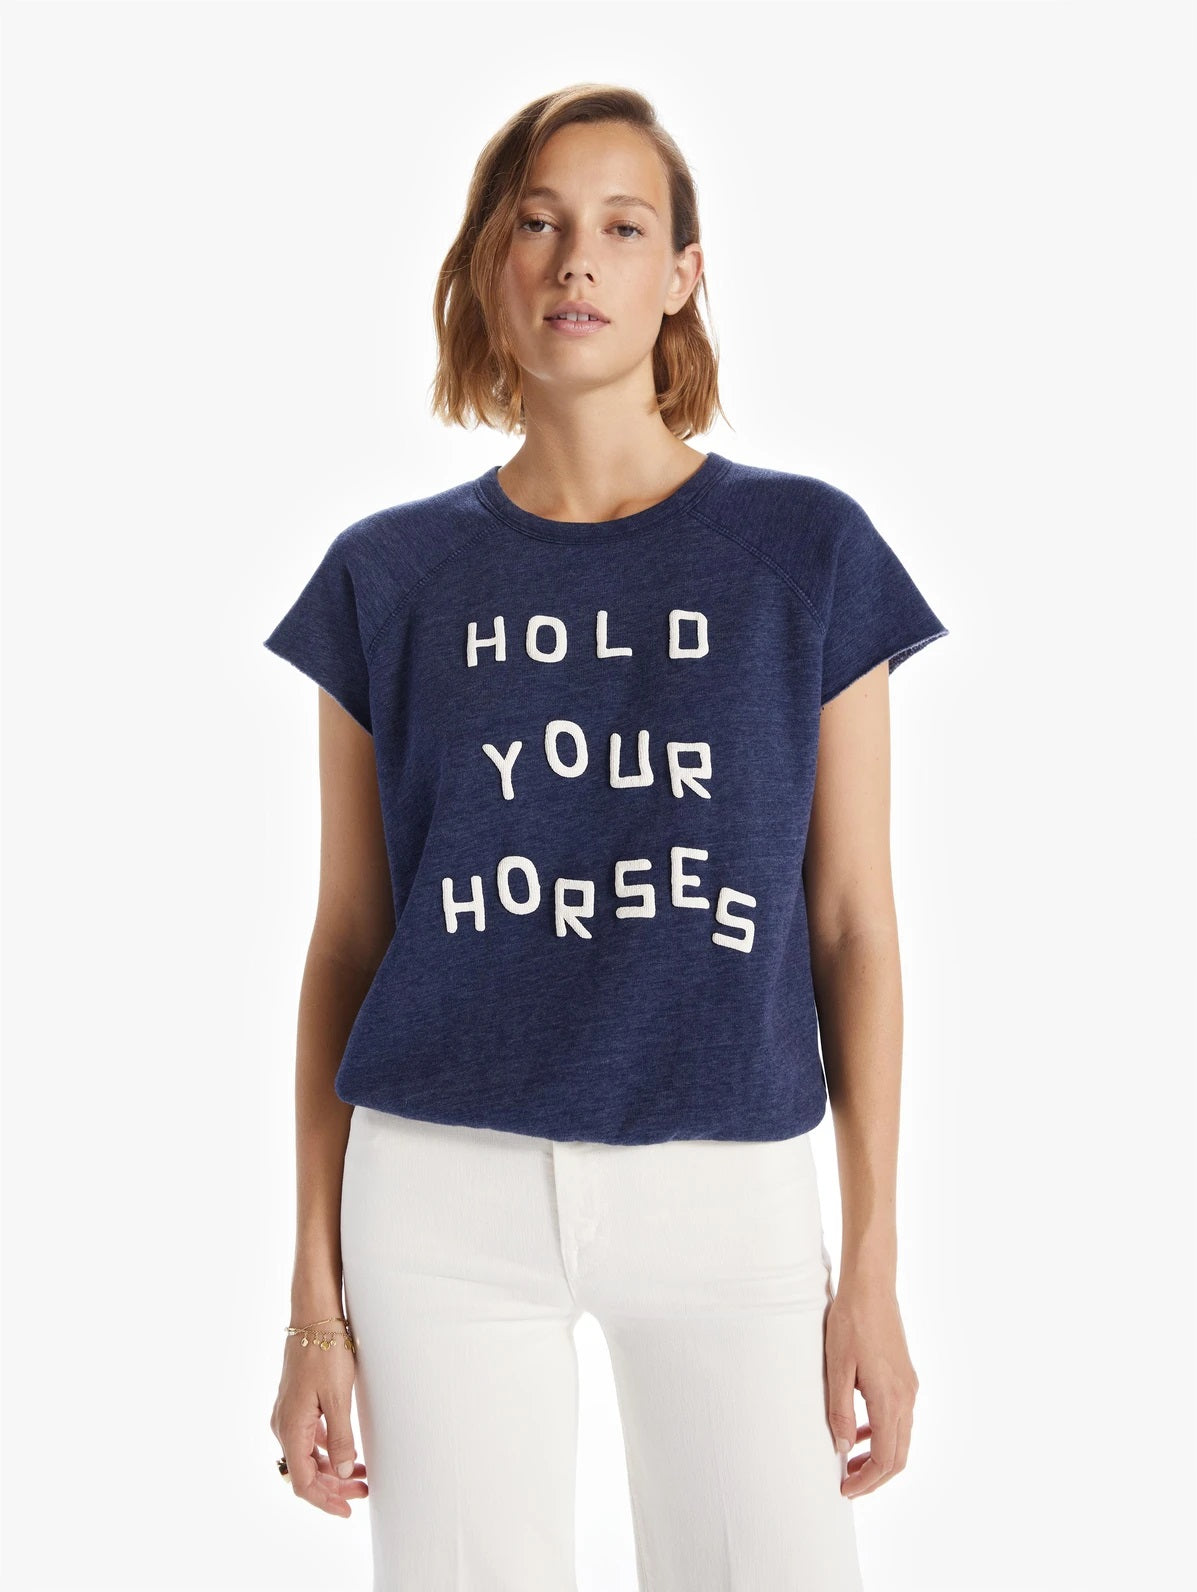 Mother - The S/S Cut Off Hugger Sweatshirt Tee in Hold Your Horses